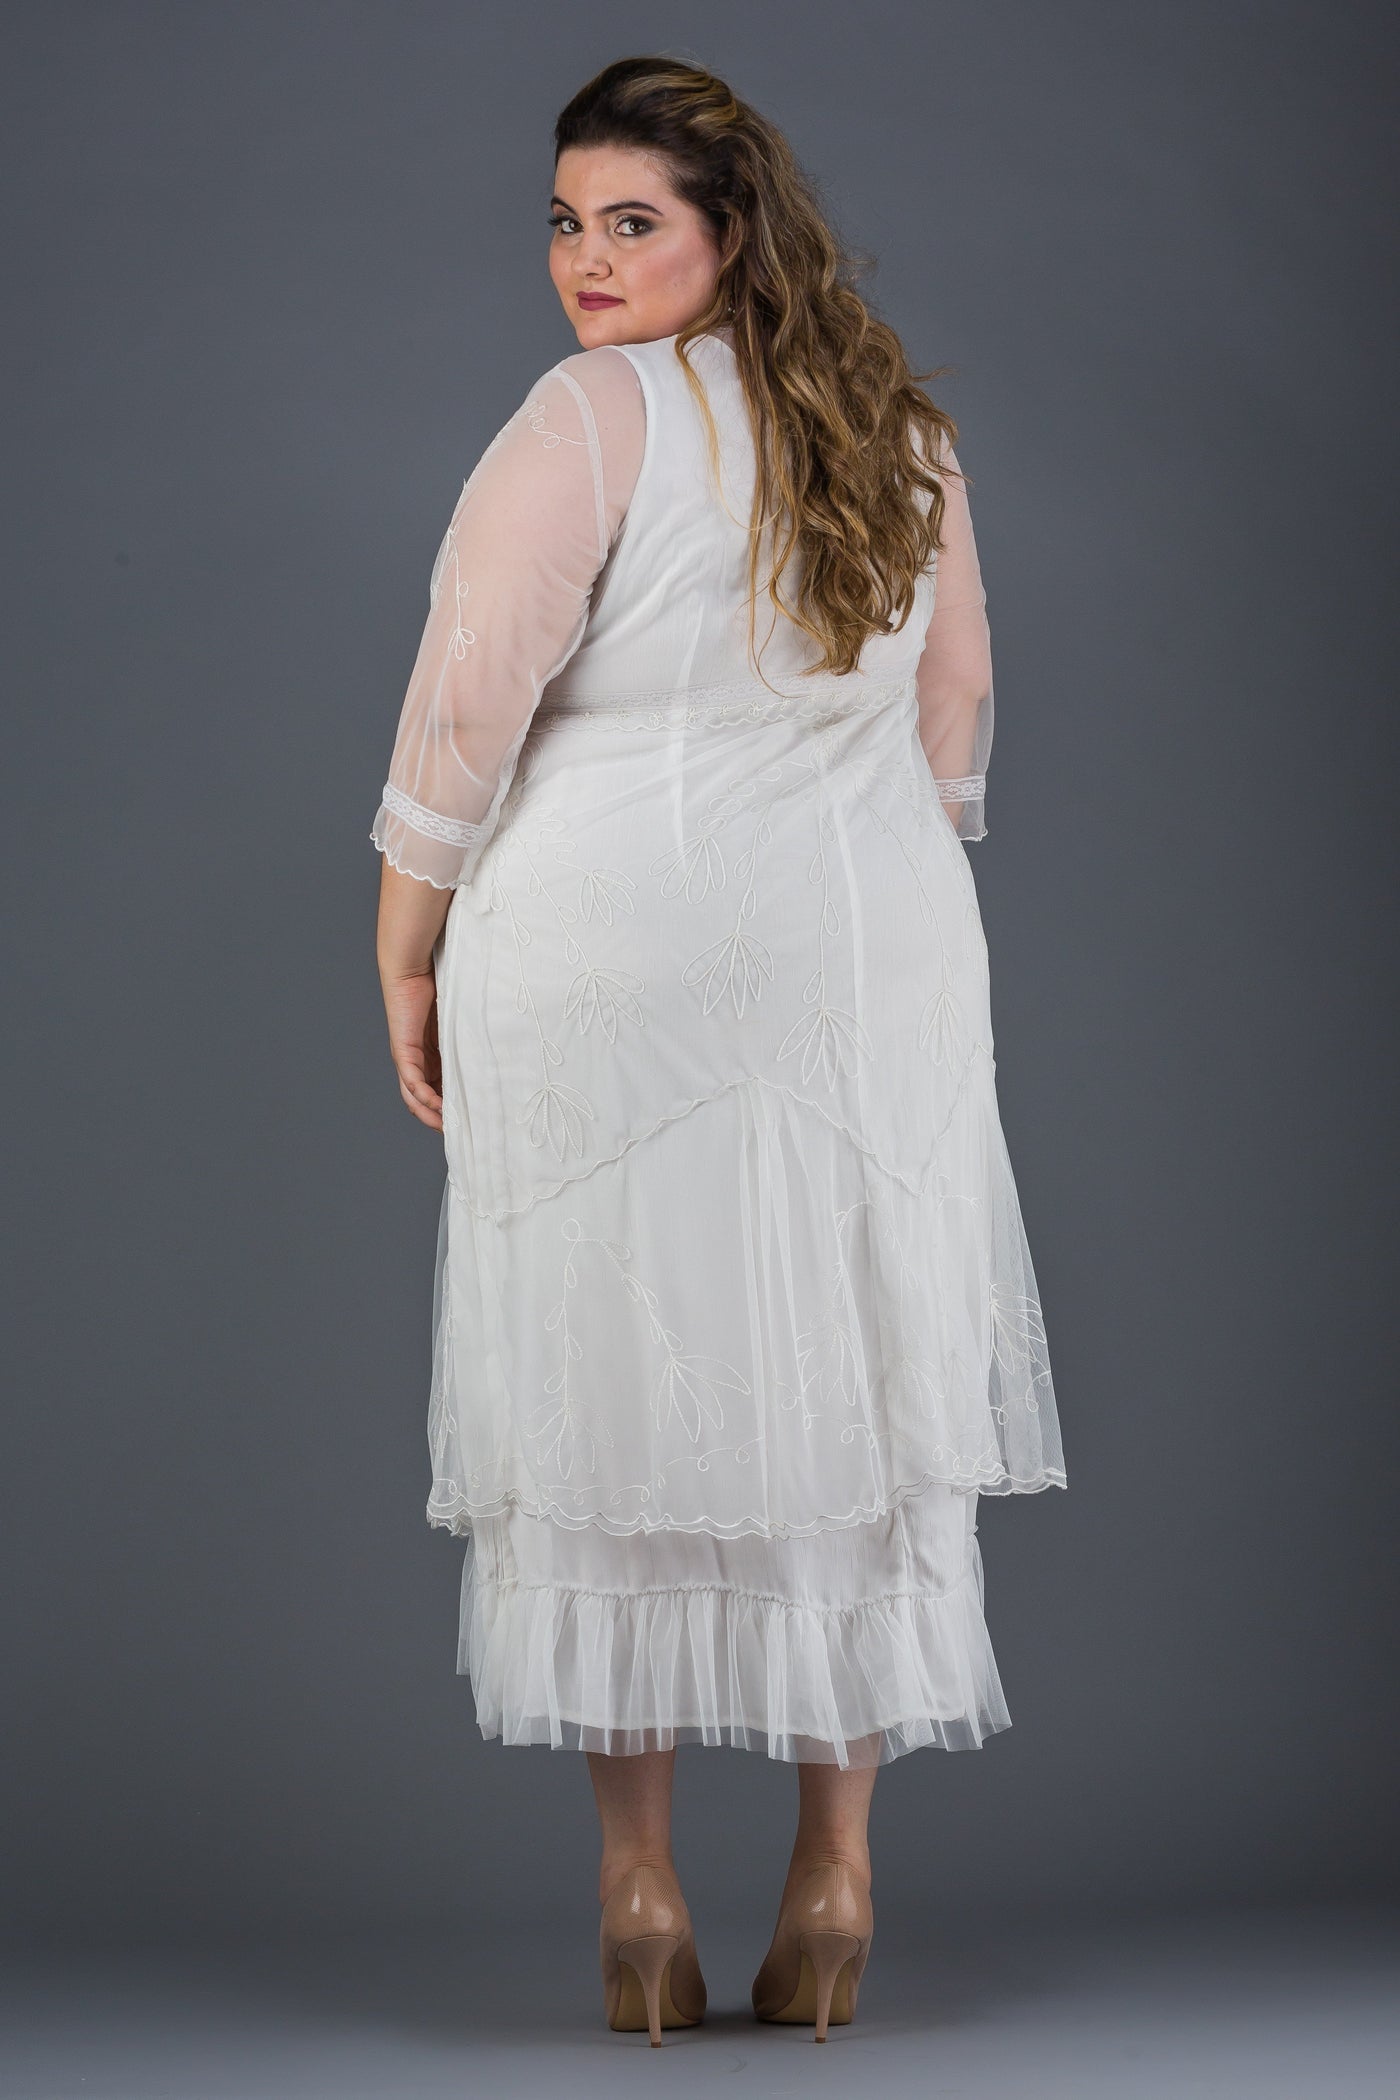 Plus Size Somewhere in Time Dress in Ivory by Nataya